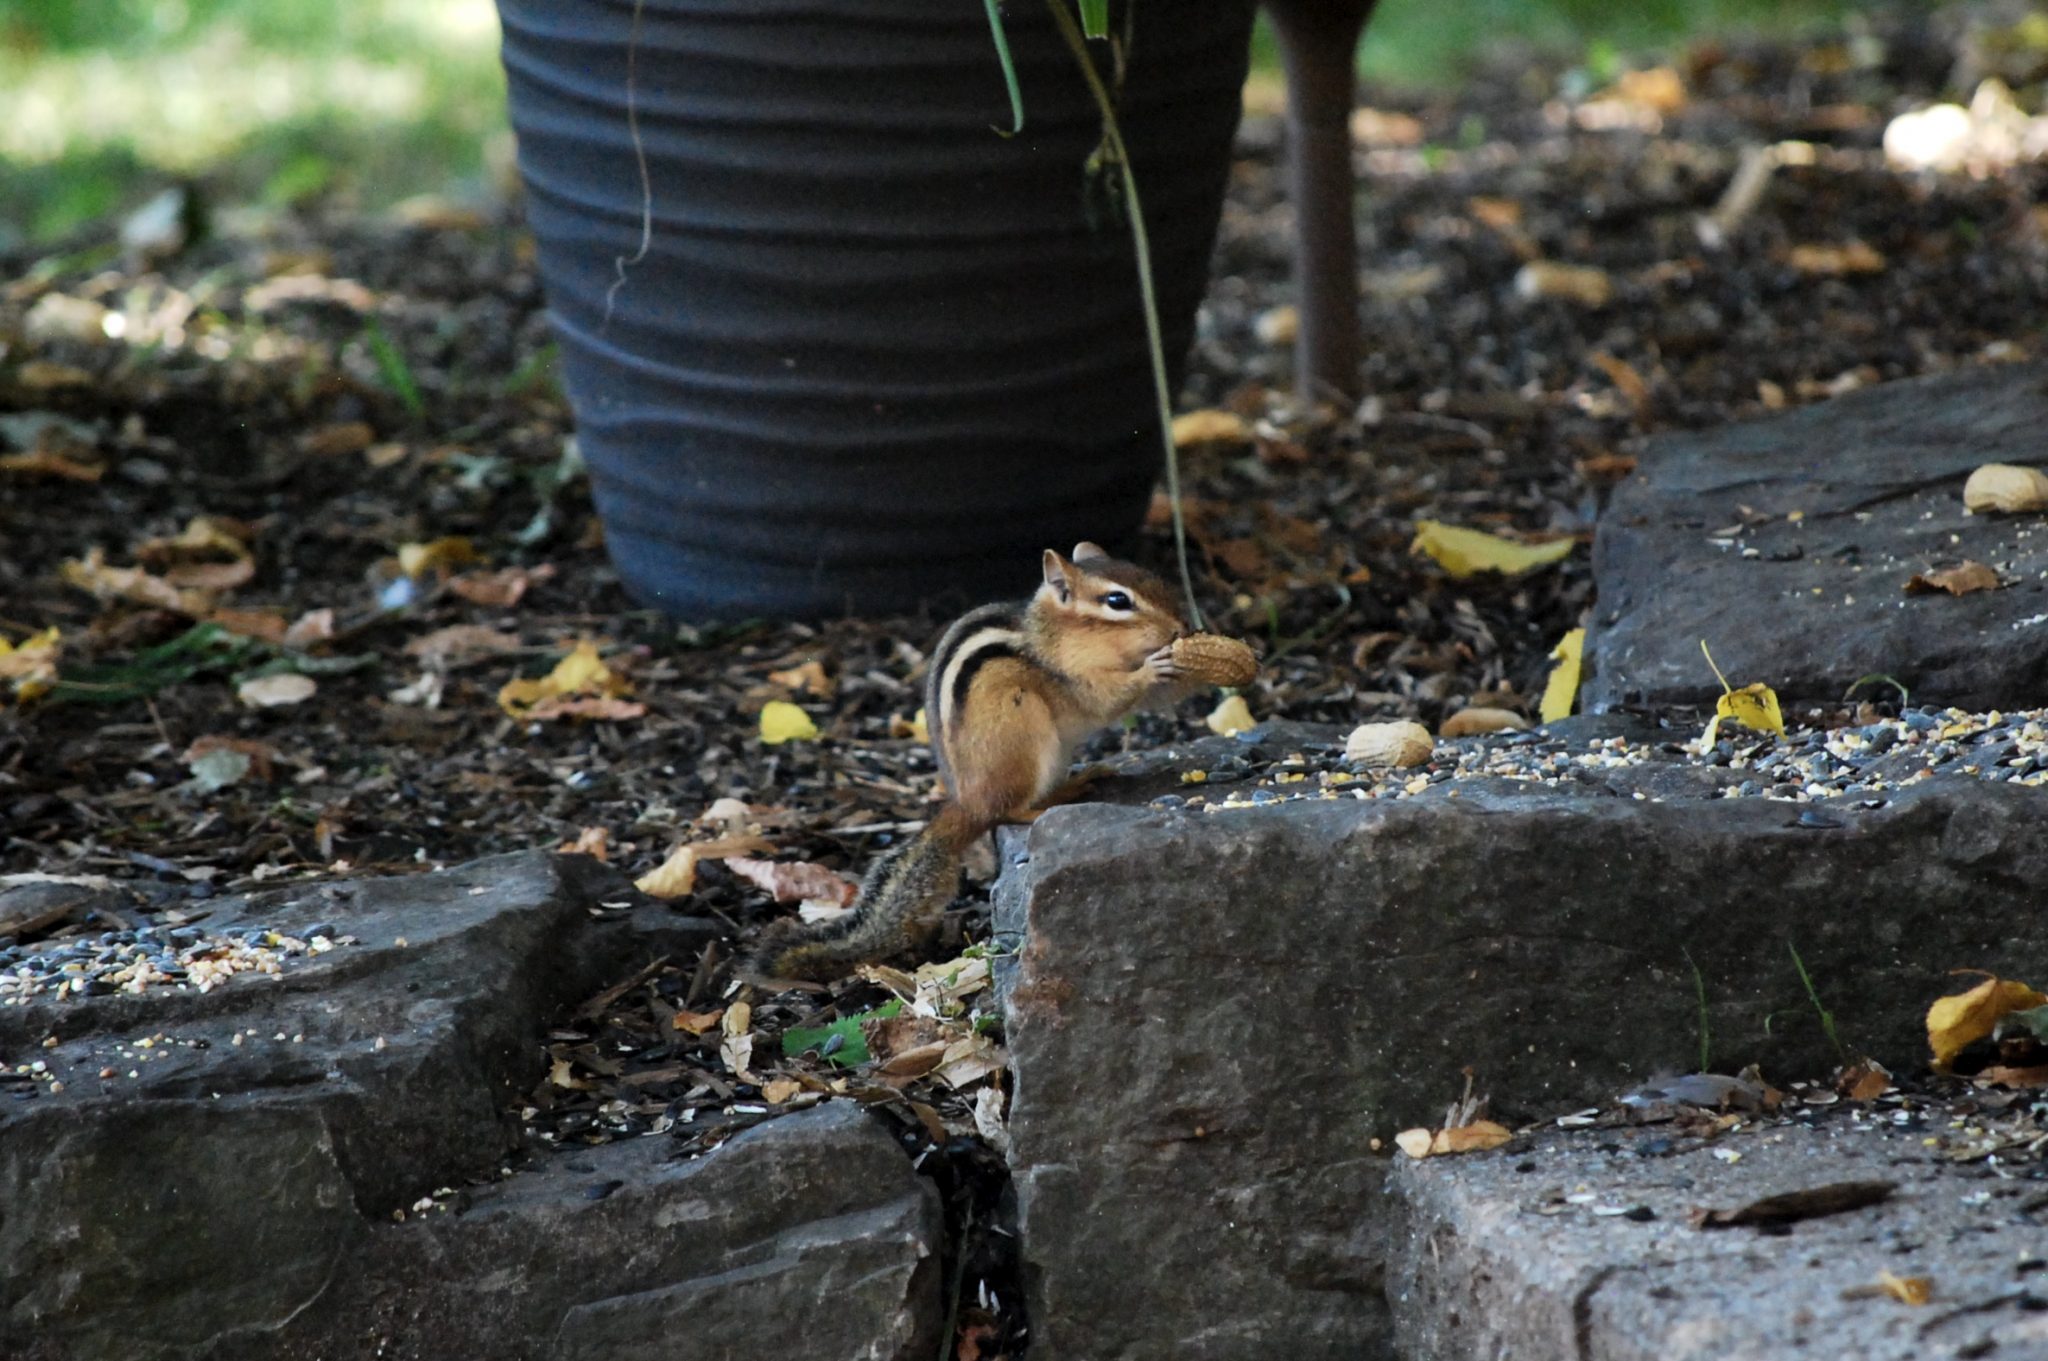 A chipmunk emerges between some rocks to eat a peanut